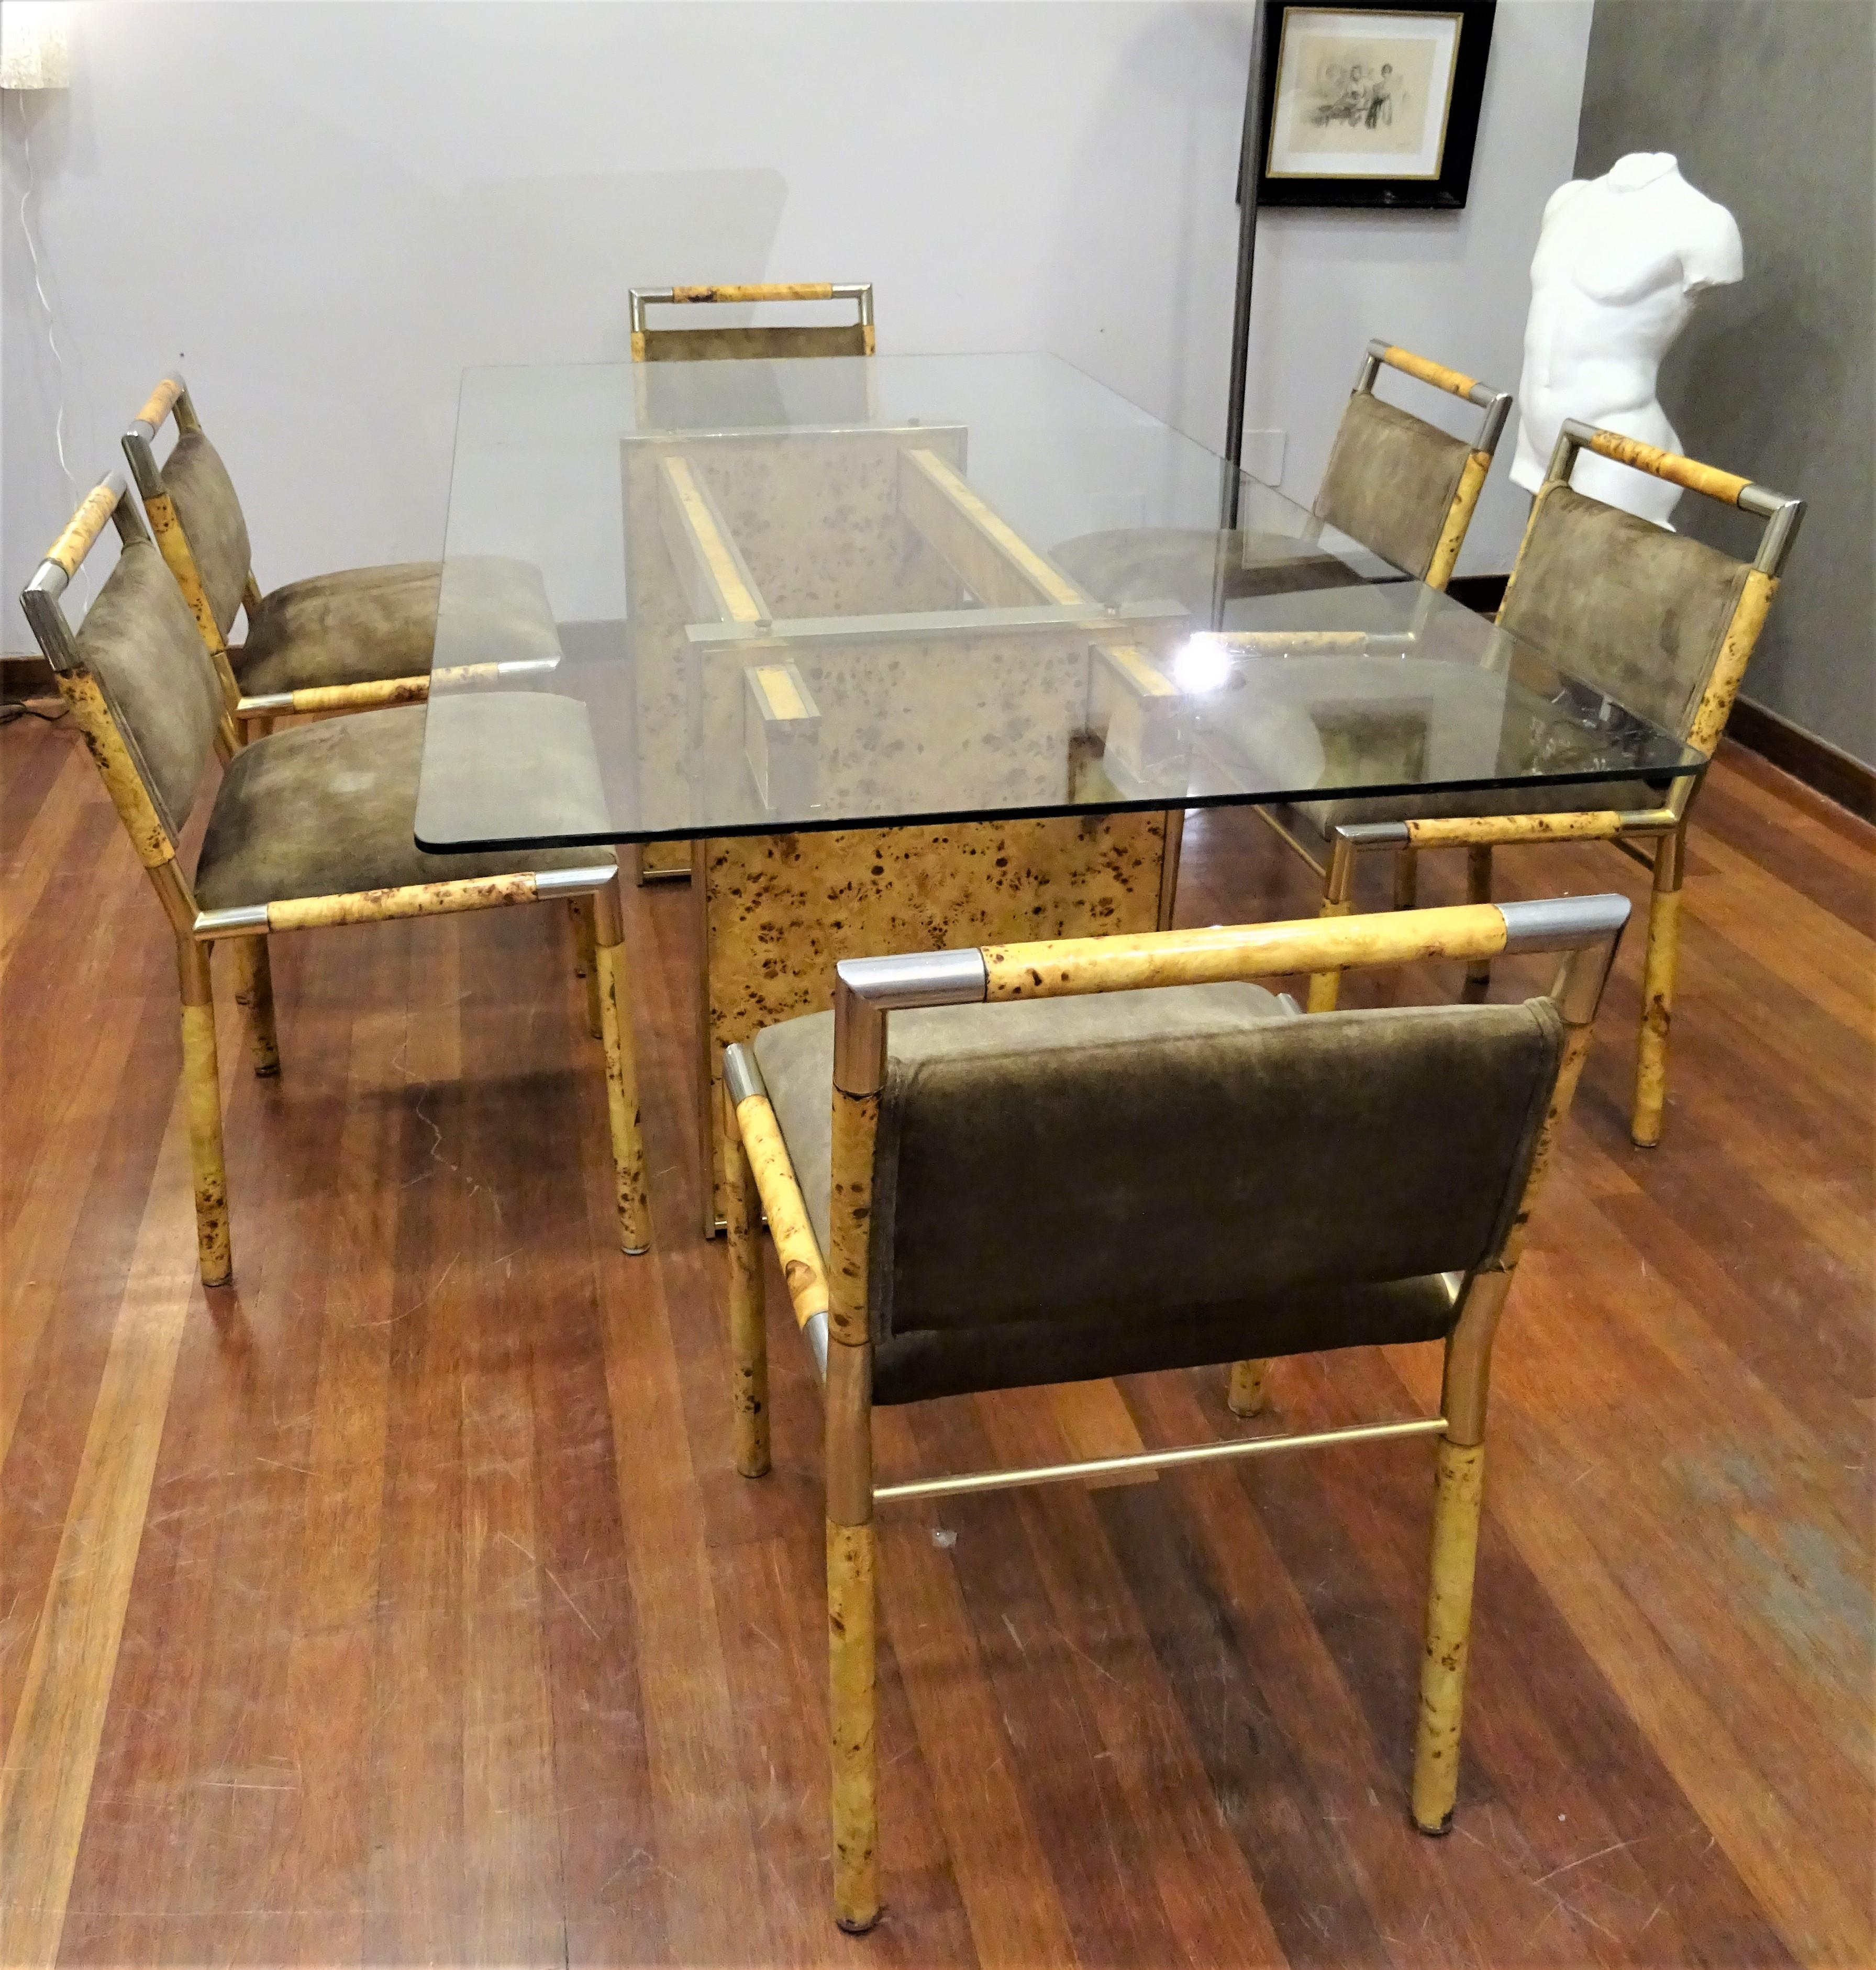 Italian dining table and chairs attributed to Willy Rizzo, 70s.
Spectacular Italian midcentury design set made in the 70s attributed to Neapolitan designer Willy Rizzo. The set consists of a large table two meters long, with the glass top and the